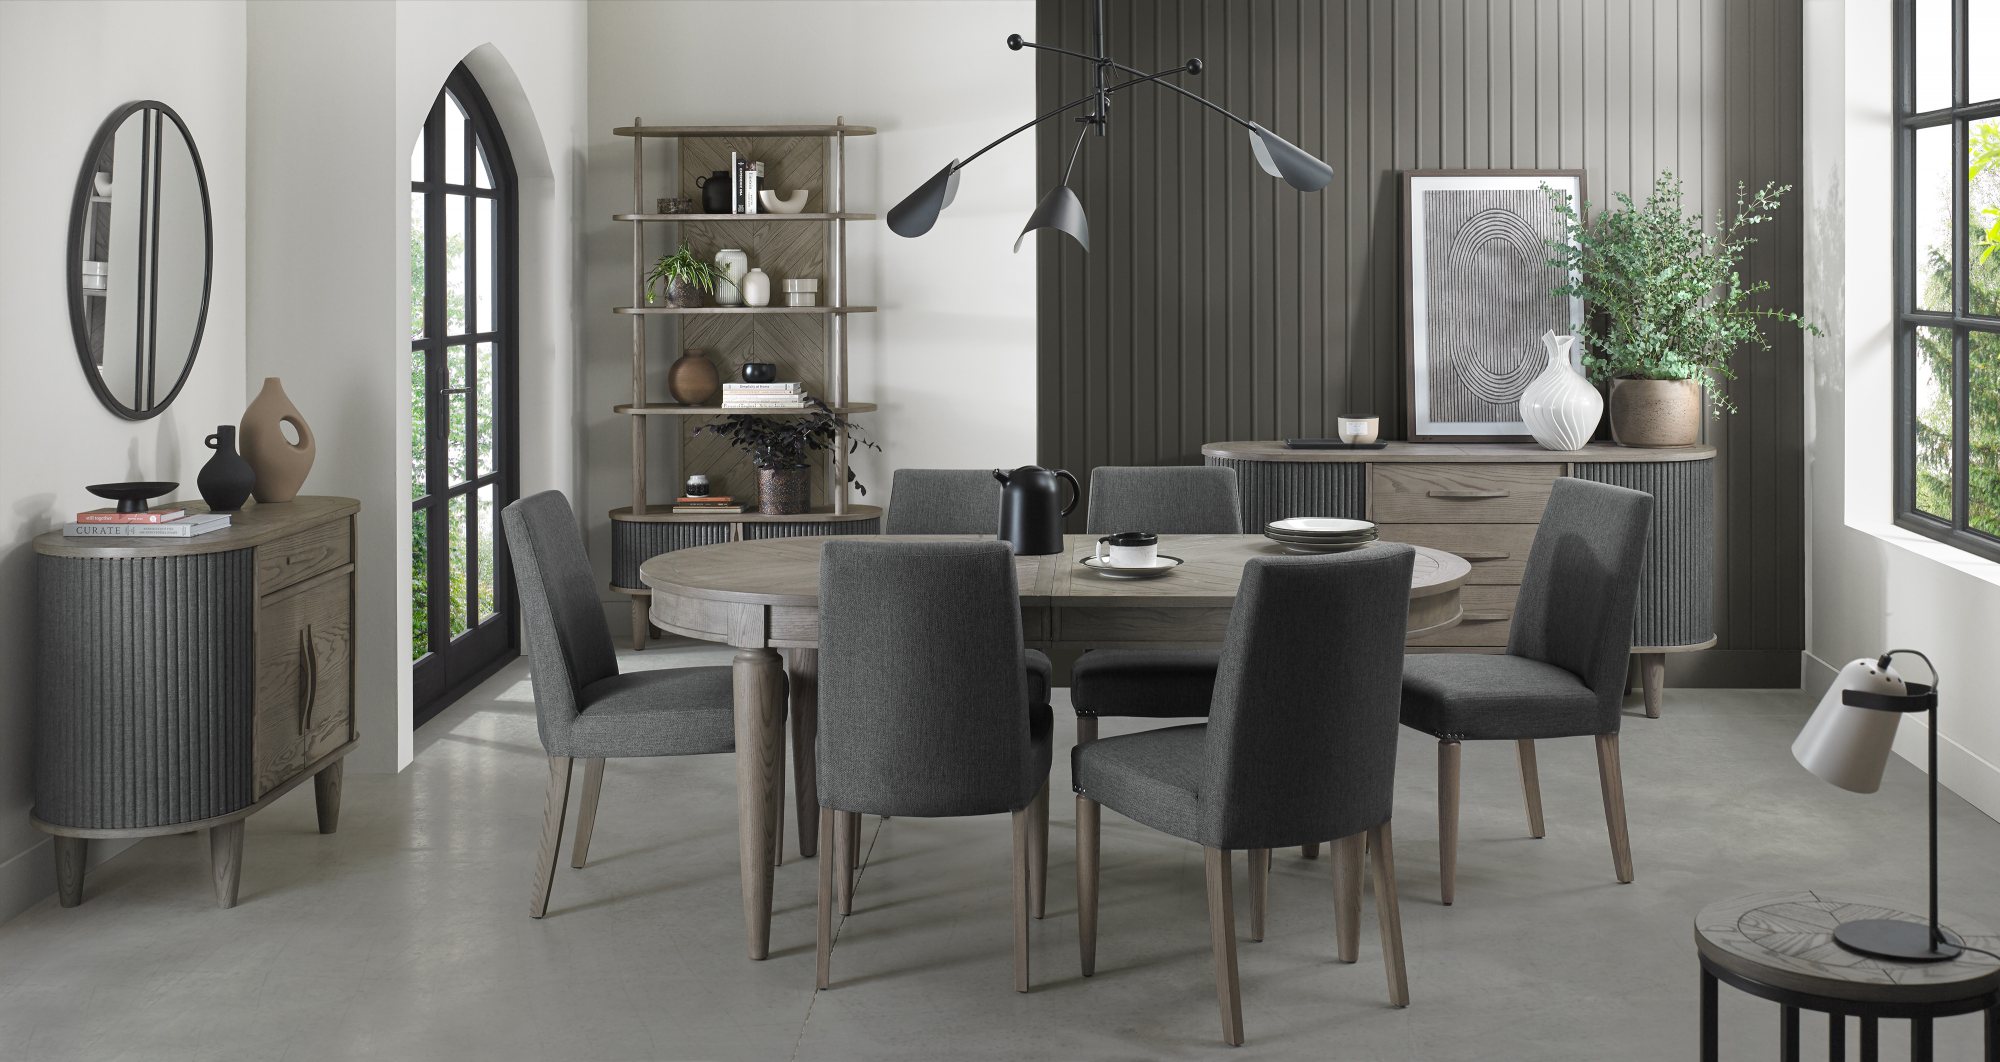 Home Origins Monet Silver Grey 6-8 Seater Dining Table & 6 Monet Silver Grey Upholstered Chairs- Slate Grey Fabric- lifestyle